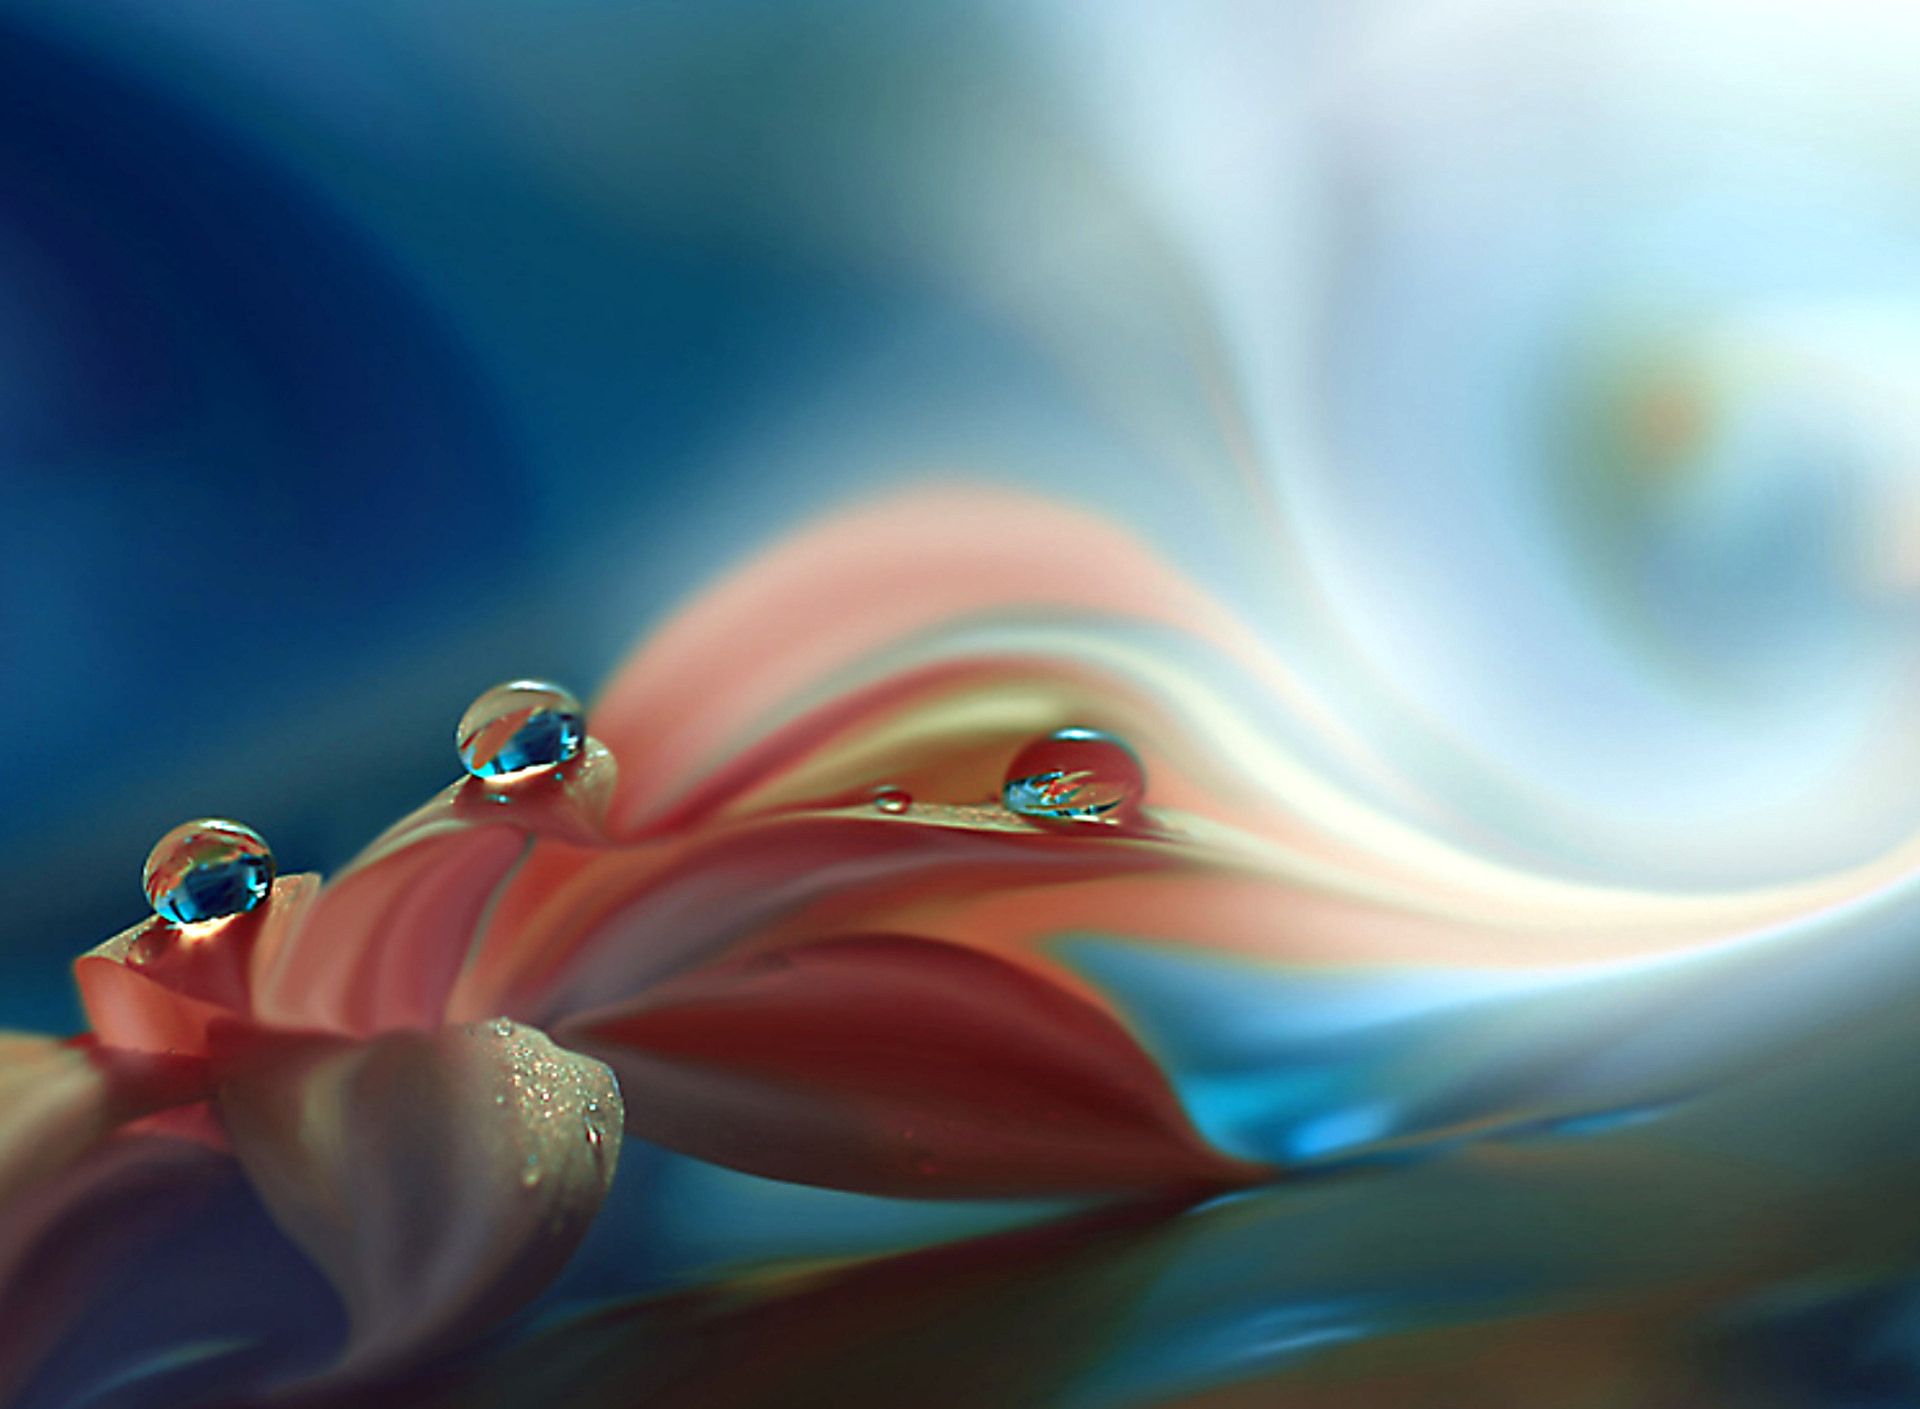 Flowers Droplets Wallpapers HD Pictures | One HD Wallpaper ...